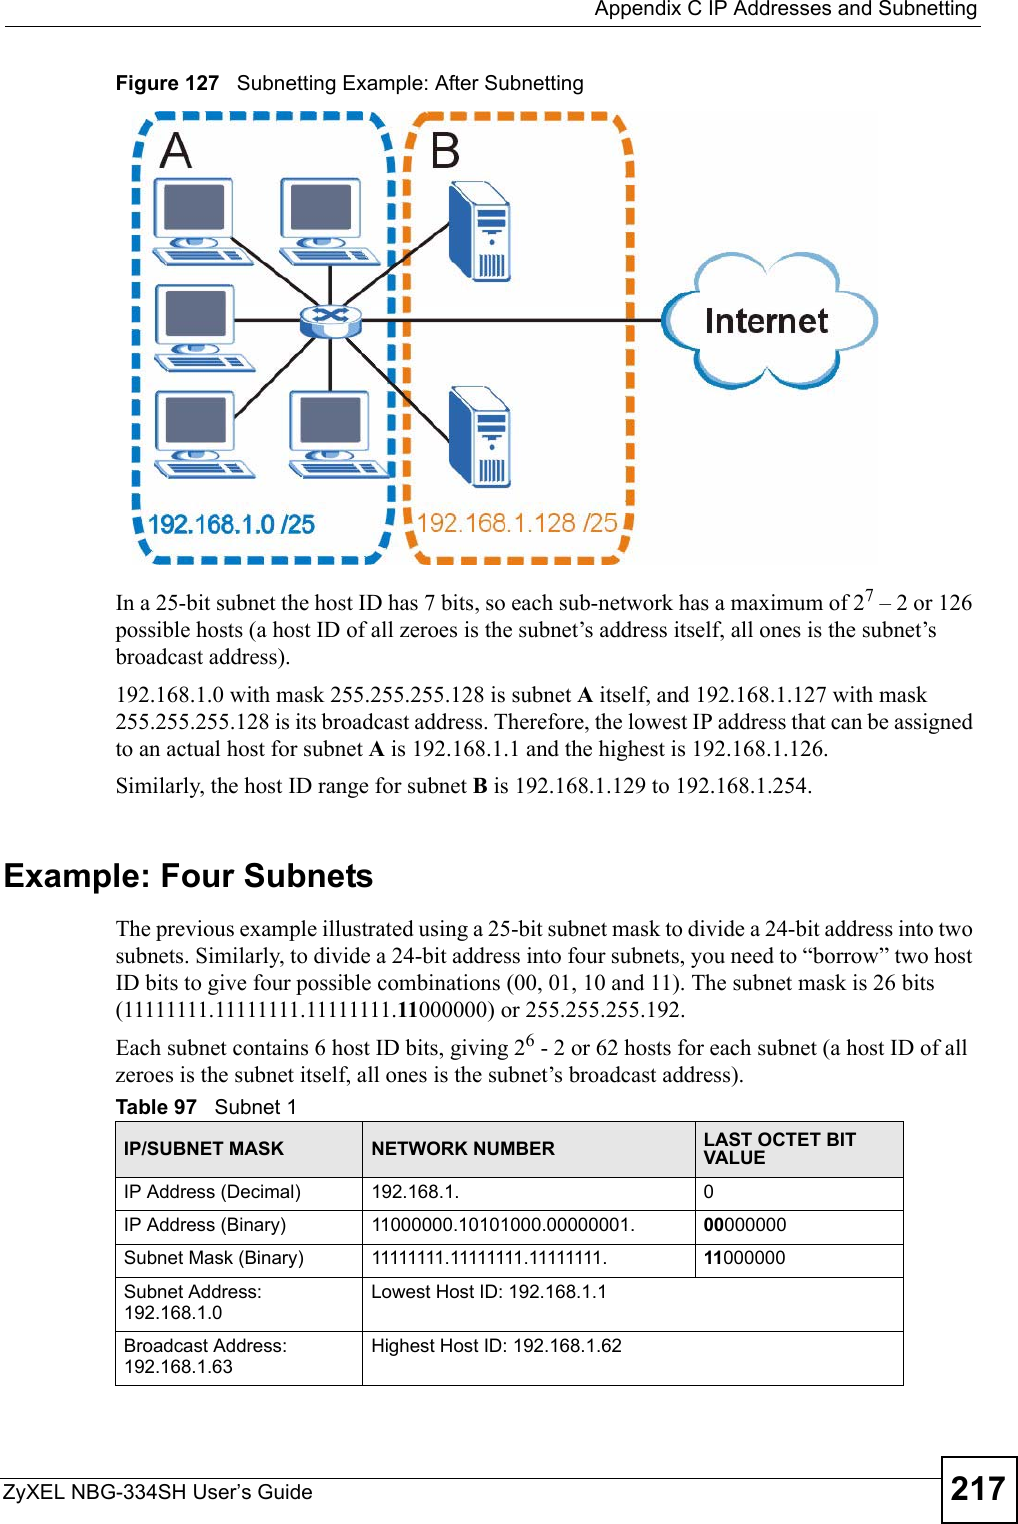  Appendix C IP Addresses and SubnettingZyXEL NBG-334SH User’s Guide 217Figure 127   Subnetting Example: After SubnettingIn a 25-bit subnet the host ID has 7 bits, so each sub-network has a maximum of 27 – 2 or 126 possible hosts (a host ID of all zeroes is the subnet’s address itself, all ones is the subnet’s broadcast address).192.168.1.0 with mask 255.255.255.128 is subnet A itself, and 192.168.1.127 with mask 255.255.255.128 is its broadcast address. Therefore, the lowest IP address that can be assigned to an actual host for subnet A is 192.168.1.1 and the highest is 192.168.1.126. Similarly, the host ID range for subnet B is 192.168.1.129 to 192.168.1.254.Example: Four Subnets The previous example illustrated using a 25-bit subnet mask to divide a 24-bit address into two subnets. Similarly, to divide a 24-bit address into four subnets, you need to “borrow” two host ID bits to give four possible combinations (00, 01, 10 and 11). The subnet mask is 26 bits (11111111.11111111.11111111.11000000) or 255.255.255.192. Each subnet contains 6 host ID bits, giving 26 - 2 or 62 hosts for each subnet (a host ID of all zeroes is the subnet itself, all ones is the subnet’s broadcast address). Table 97   Subnet 1IP/SUBNET MASK NETWORK NUMBER LAST OCTET BIT VALUEIP Address (Decimal) 192.168.1. 0IP Address (Binary) 11000000.10101000.00000001. 00000000Subnet Mask (Binary) 11111111.11111111.11111111. 11000000Subnet Address: 192.168.1.0Lowest Host ID: 192.168.1.1Broadcast Address: 192.168.1.63Highest Host ID: 192.168.1.62